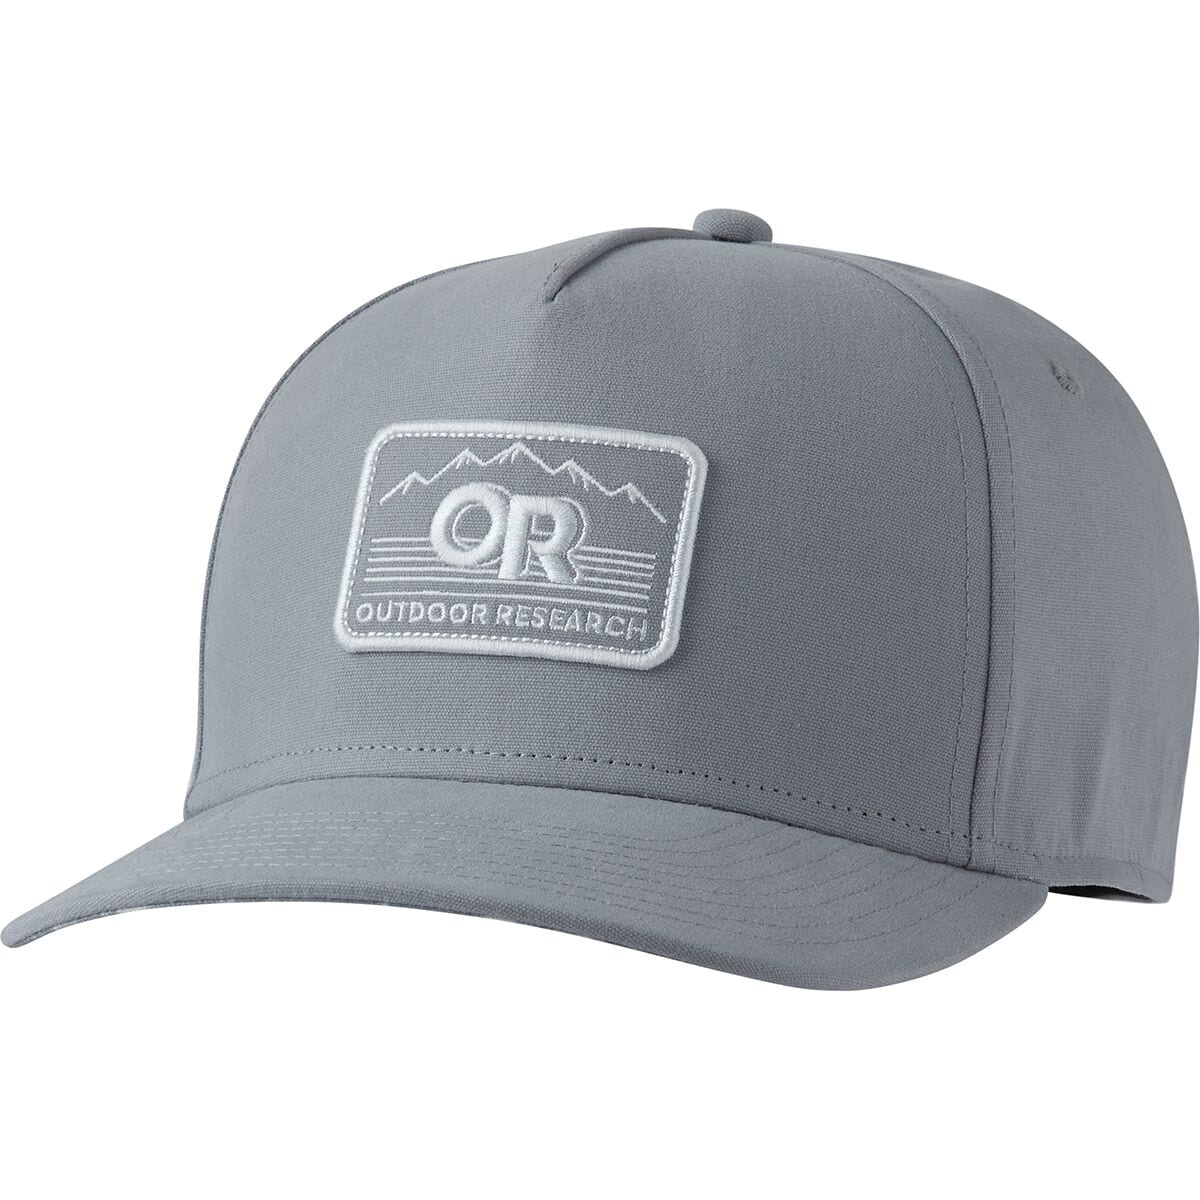 Outdoor Research Printed Advocate Trucker Hat